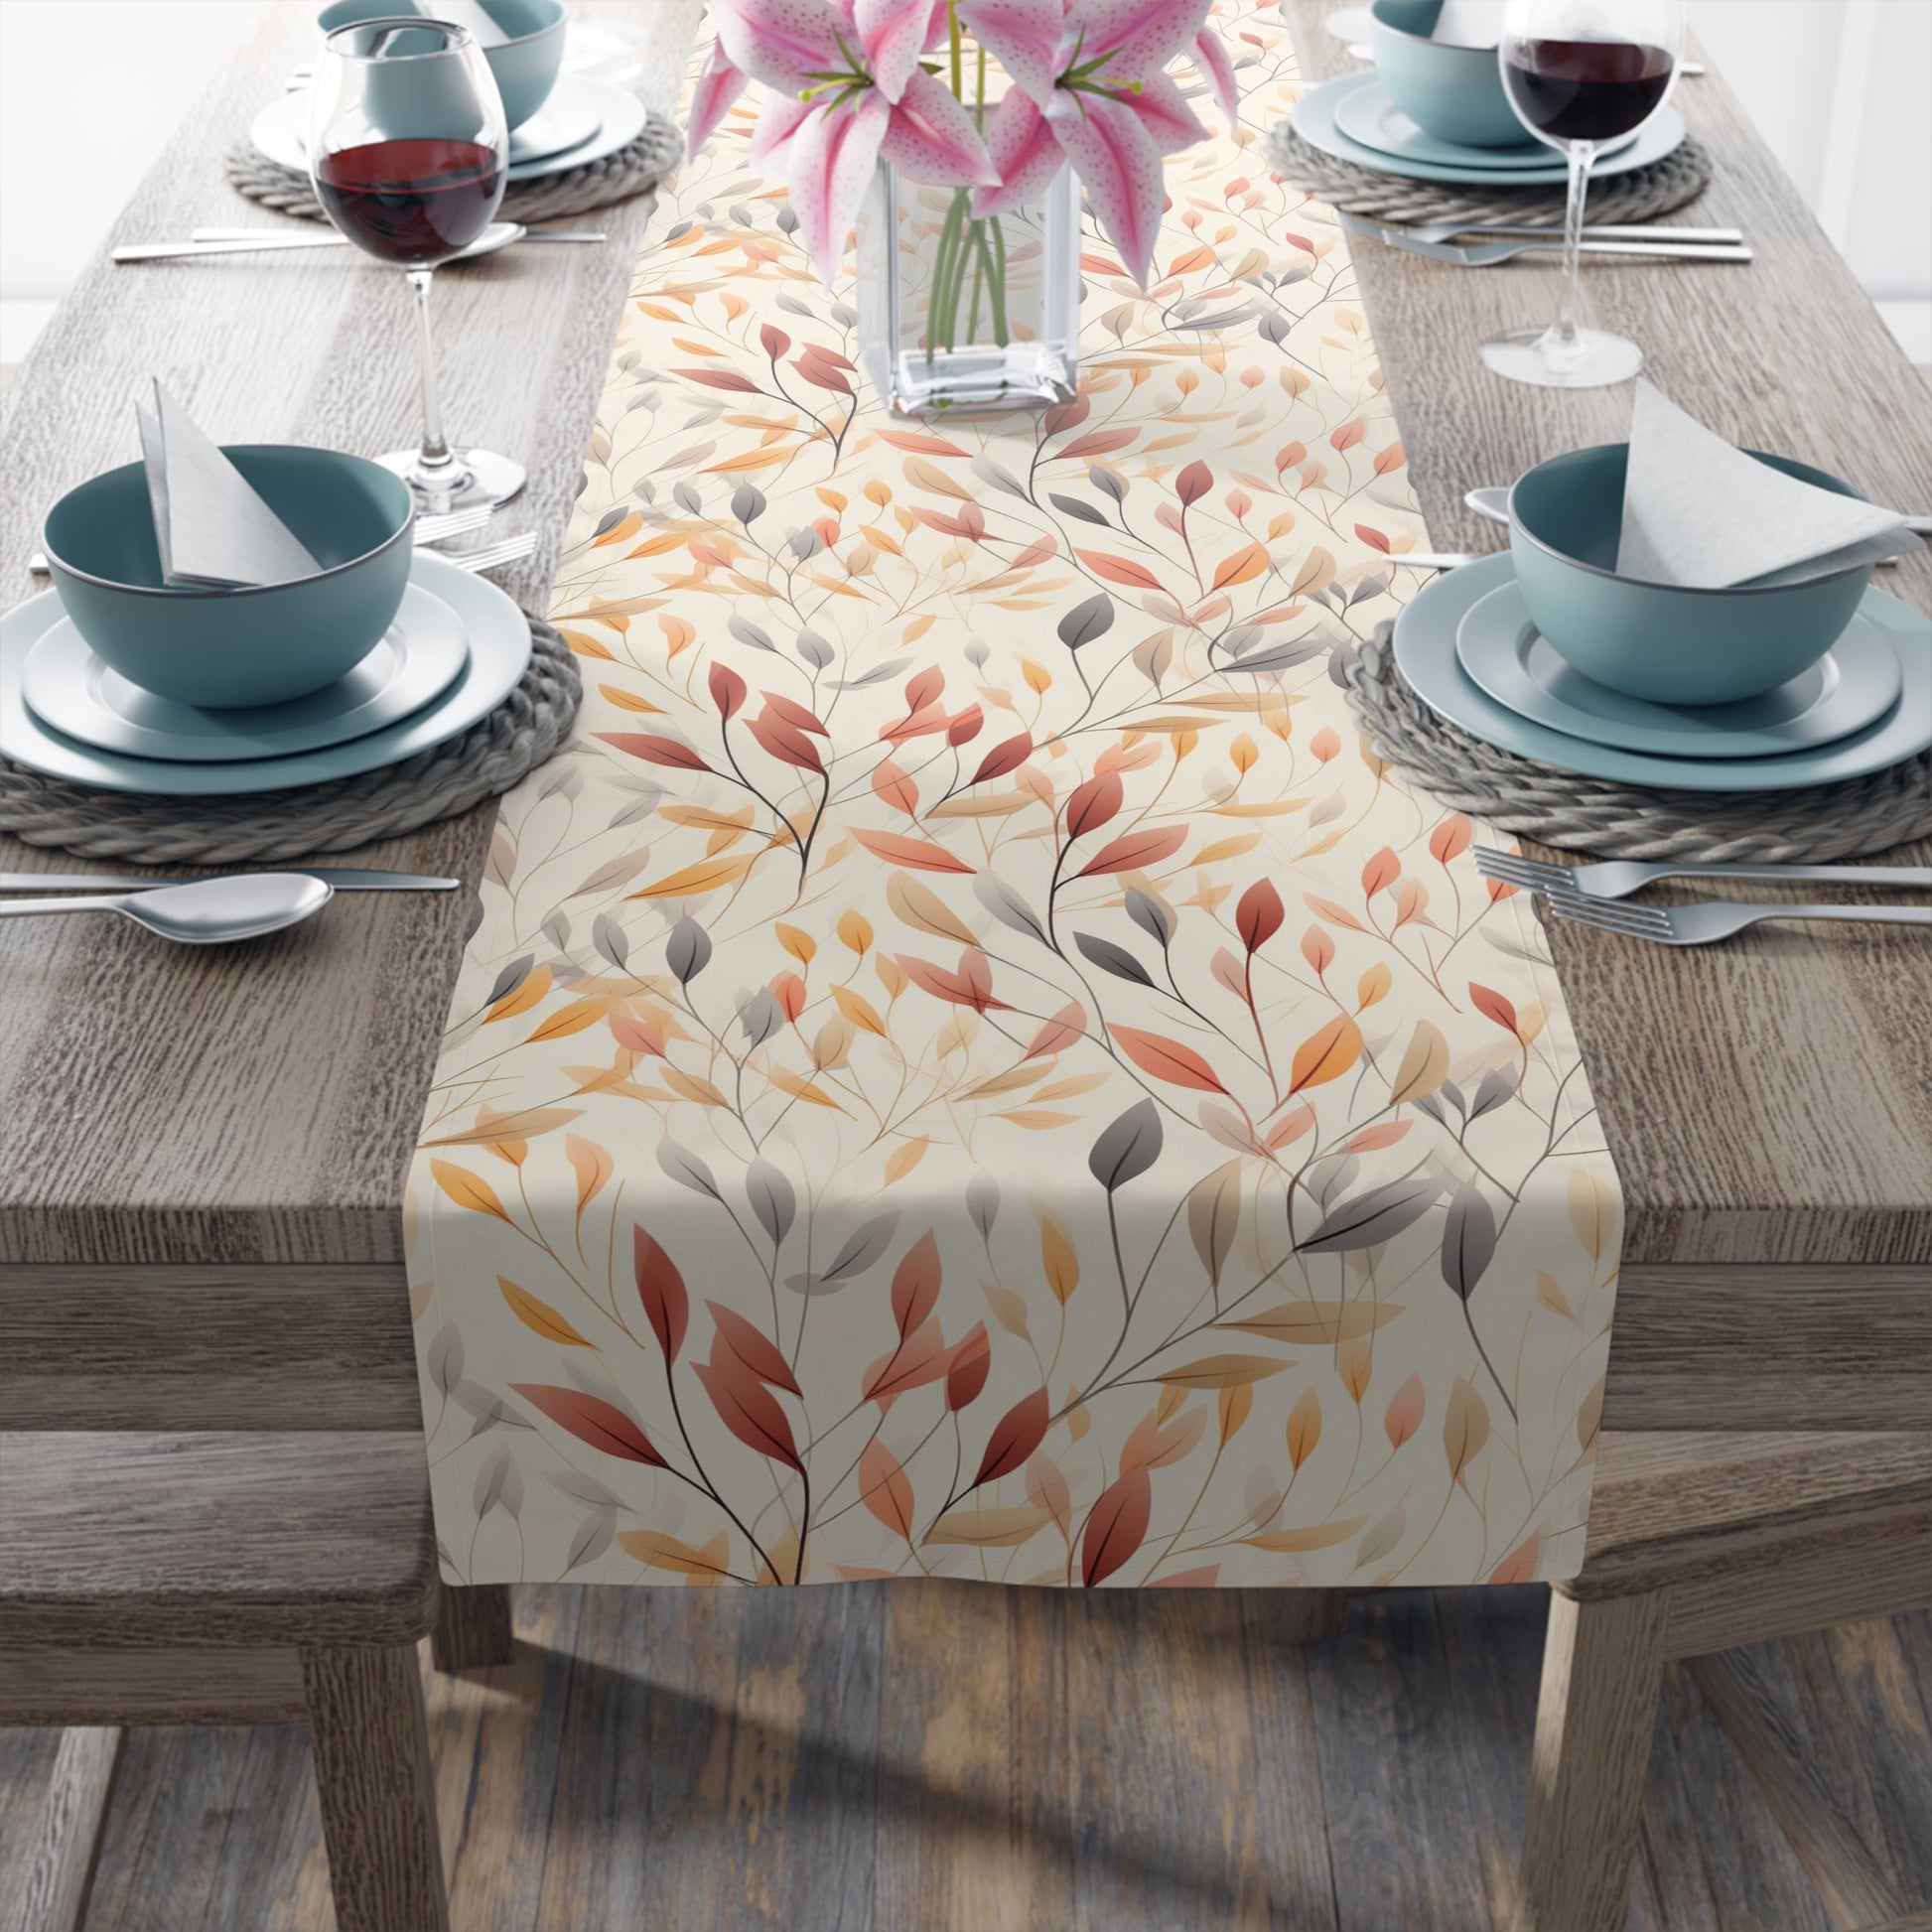 fall leaves table runner with orange, blue, red and yellow leaf print